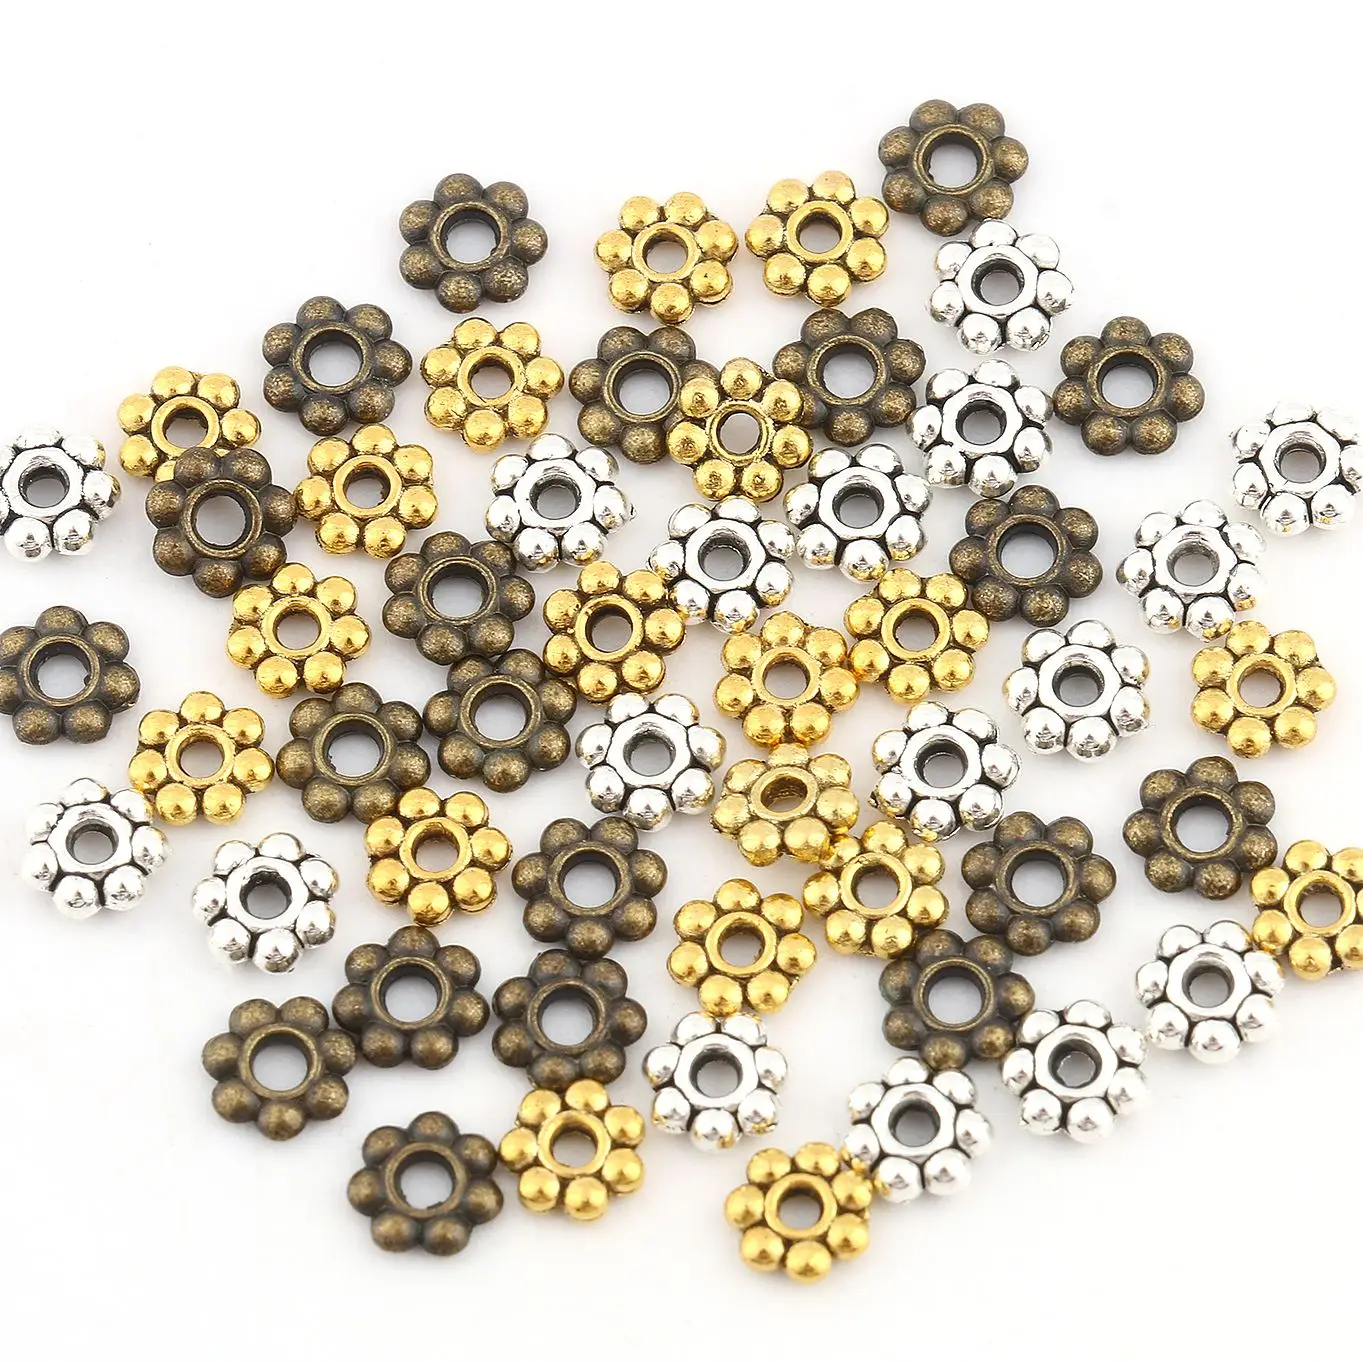 200pcs 6mm Gold Silver Color End Metal Wheel Charm Beads Daisy Flower Loose Spacer Beads For DIY Jewelry Making Accessories